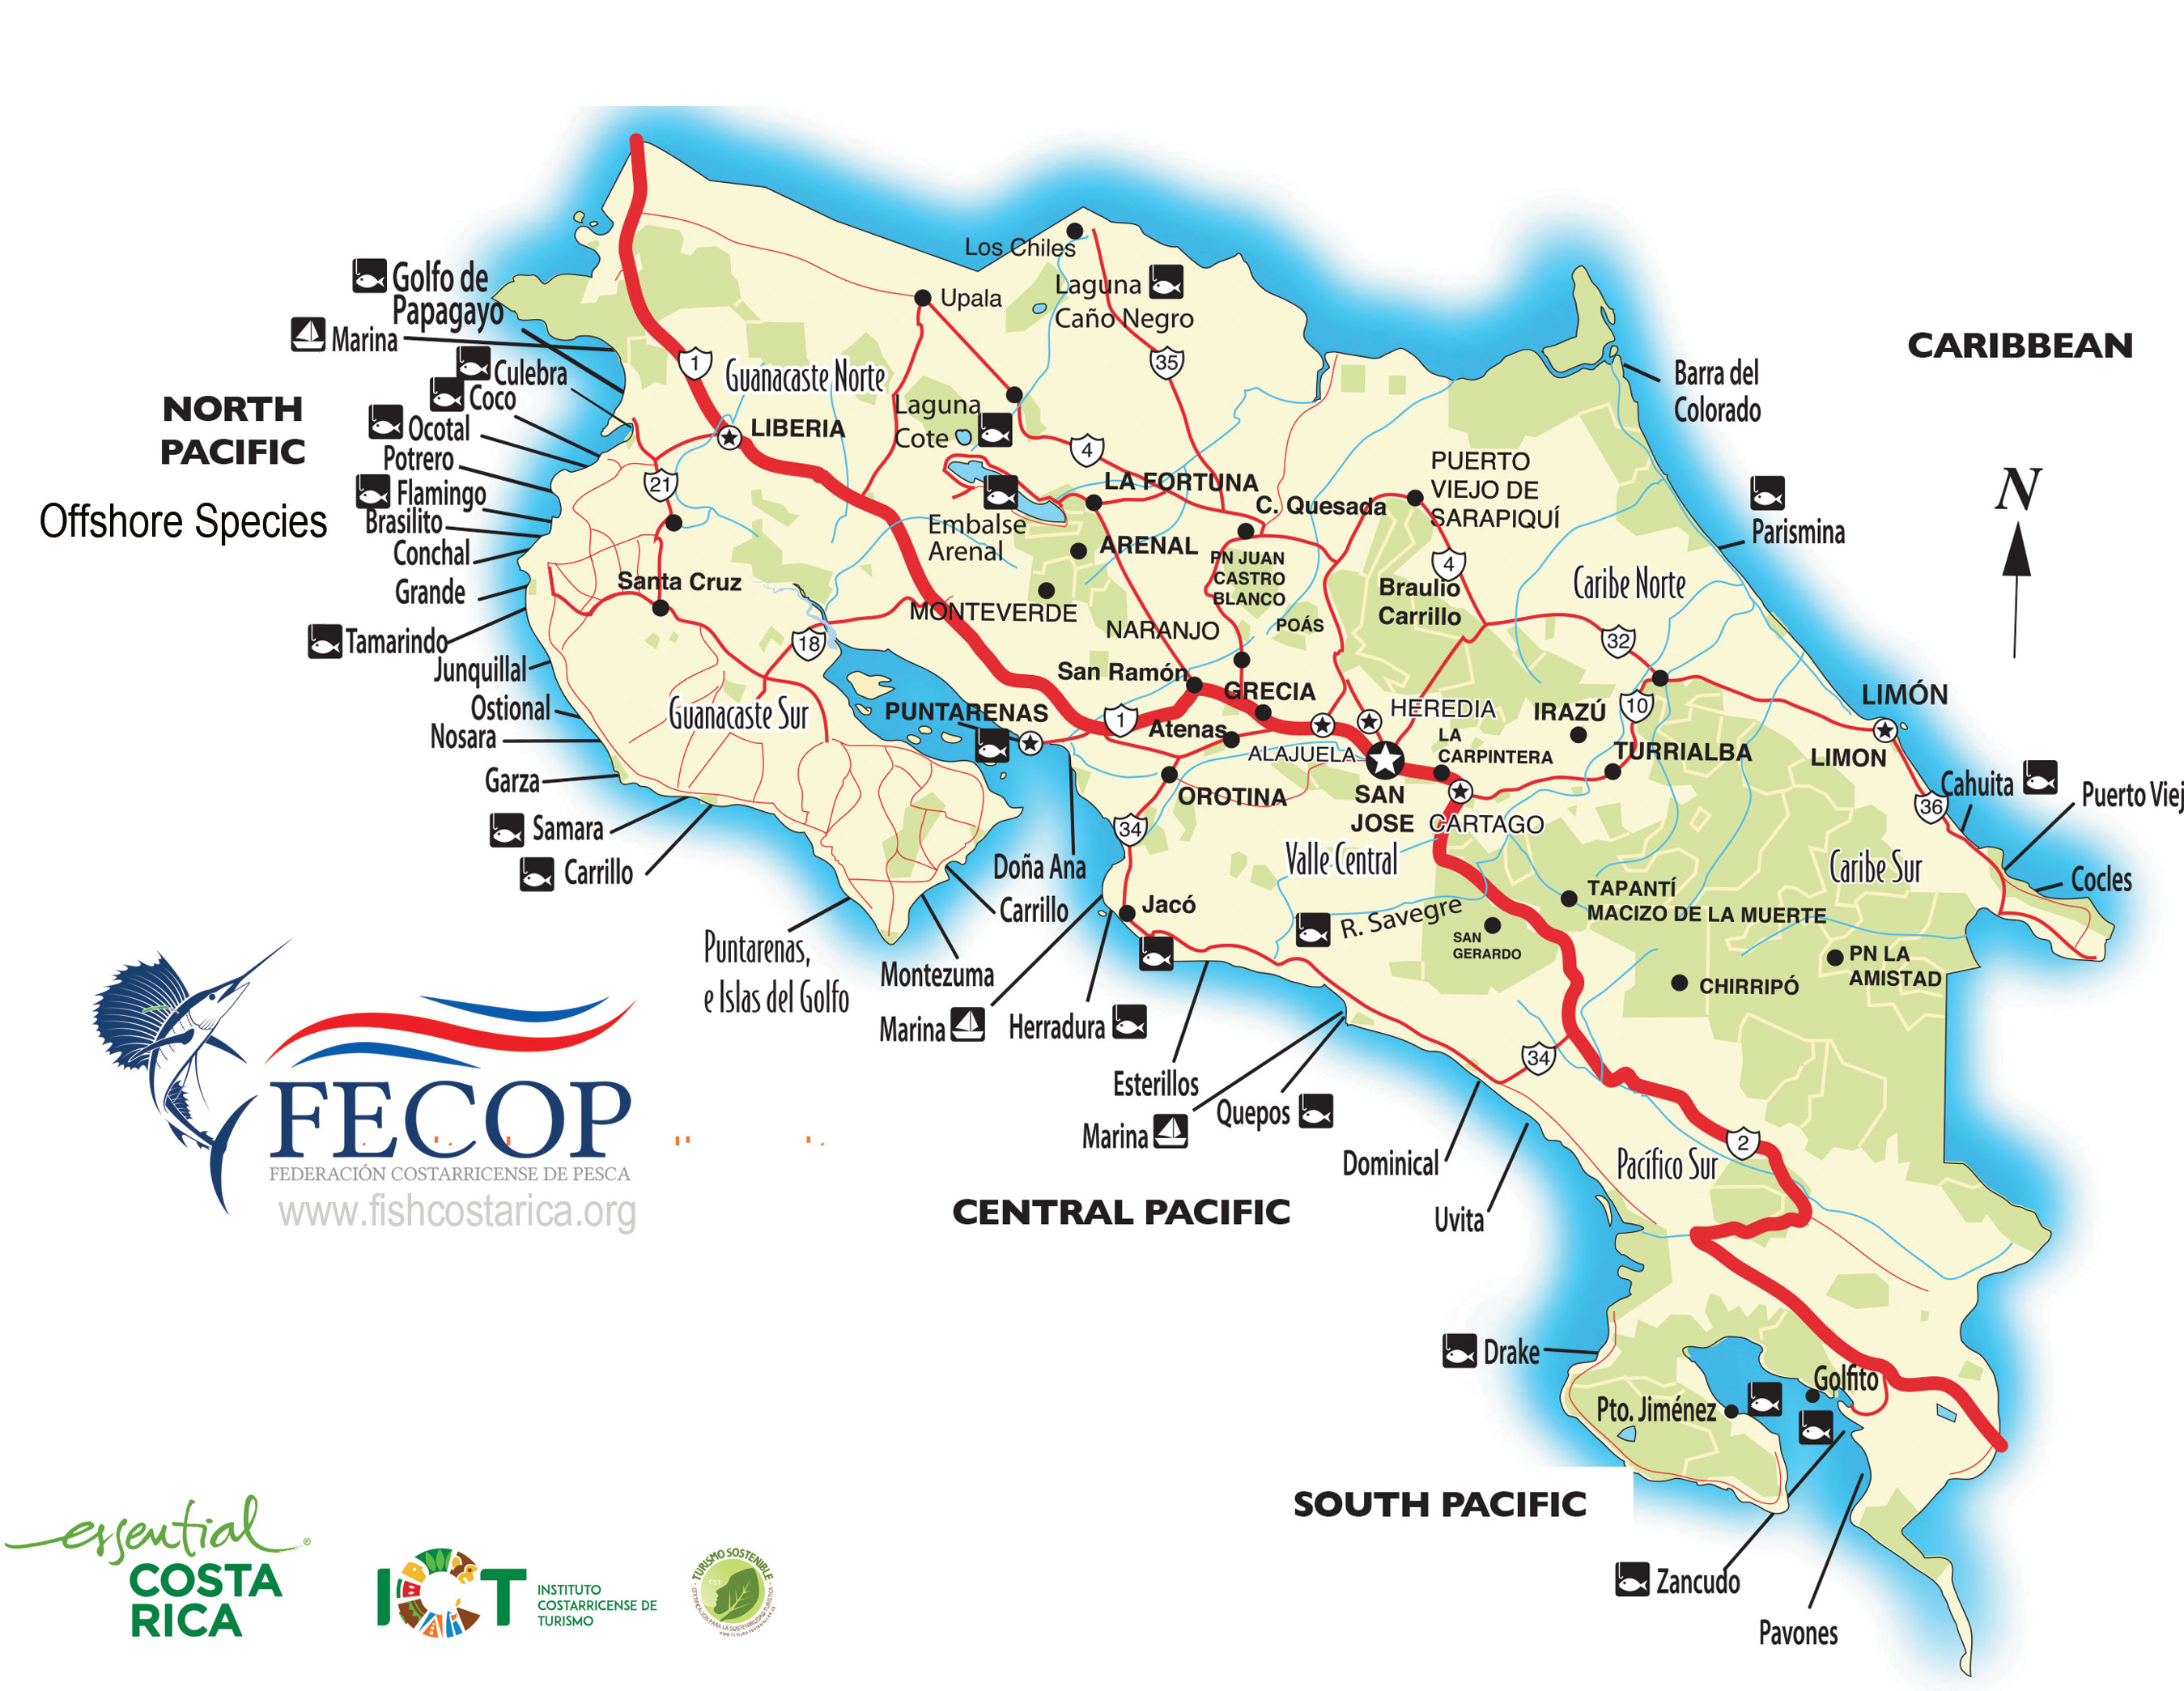 General Costa Rica Information And Fishing Map Costa Rica Fishing Fecop